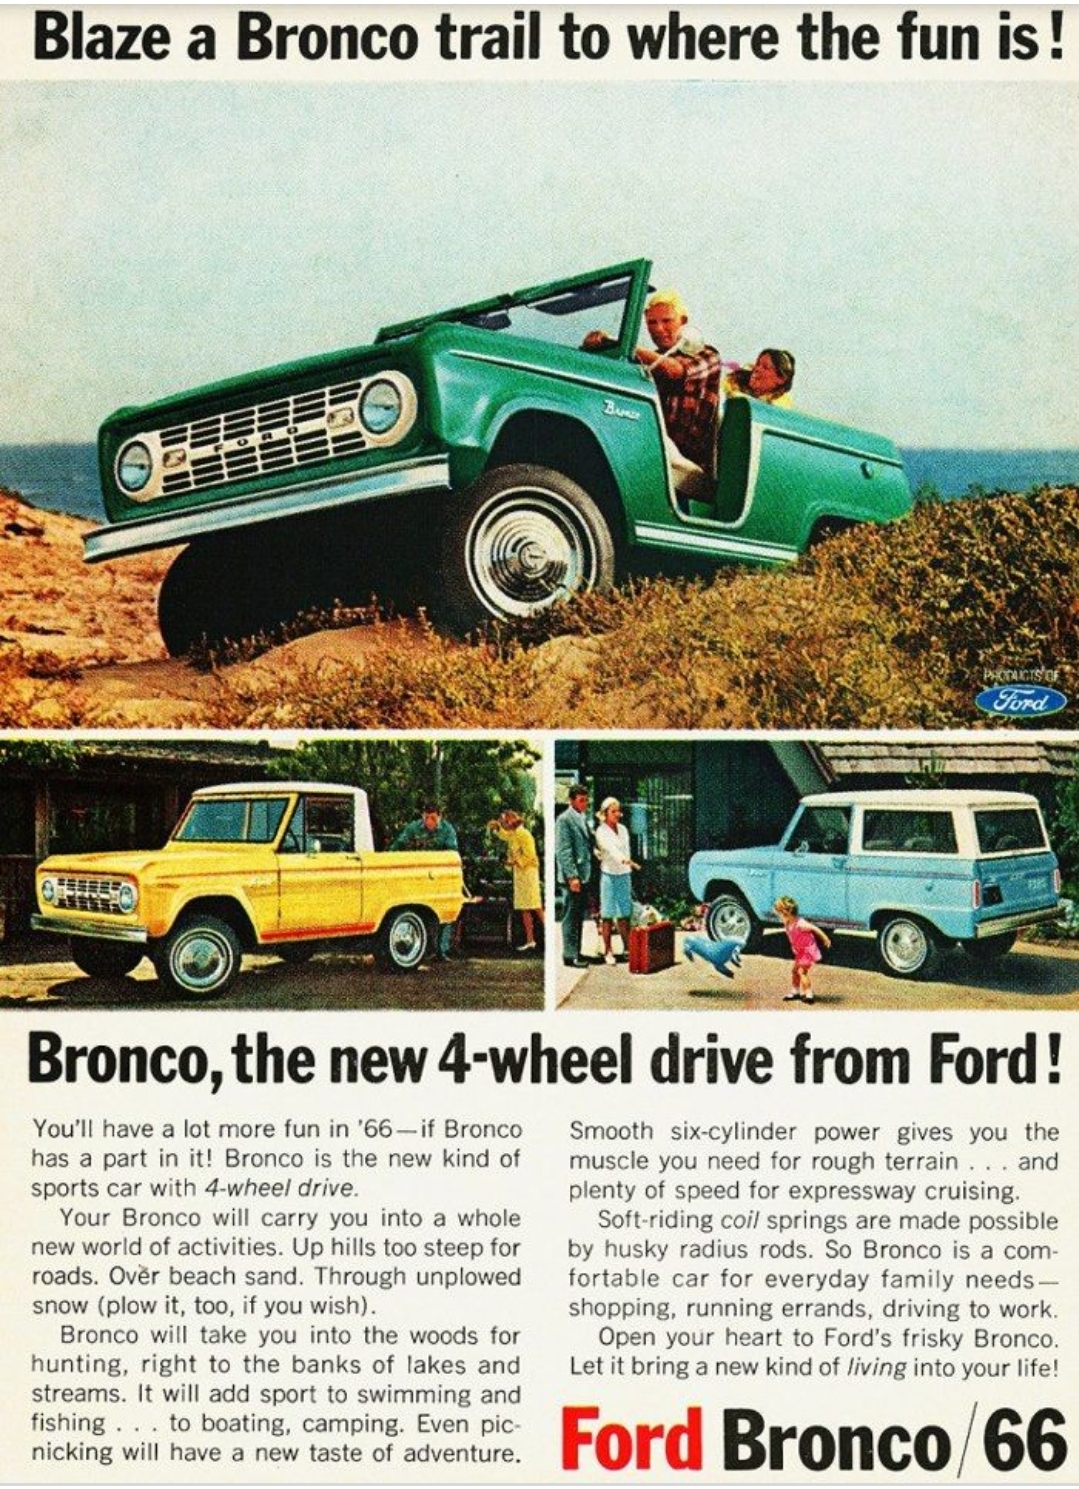 Ford Bronco Build & Price Update from Ford – Q&A with Bronco Brand Manager 1609551779718